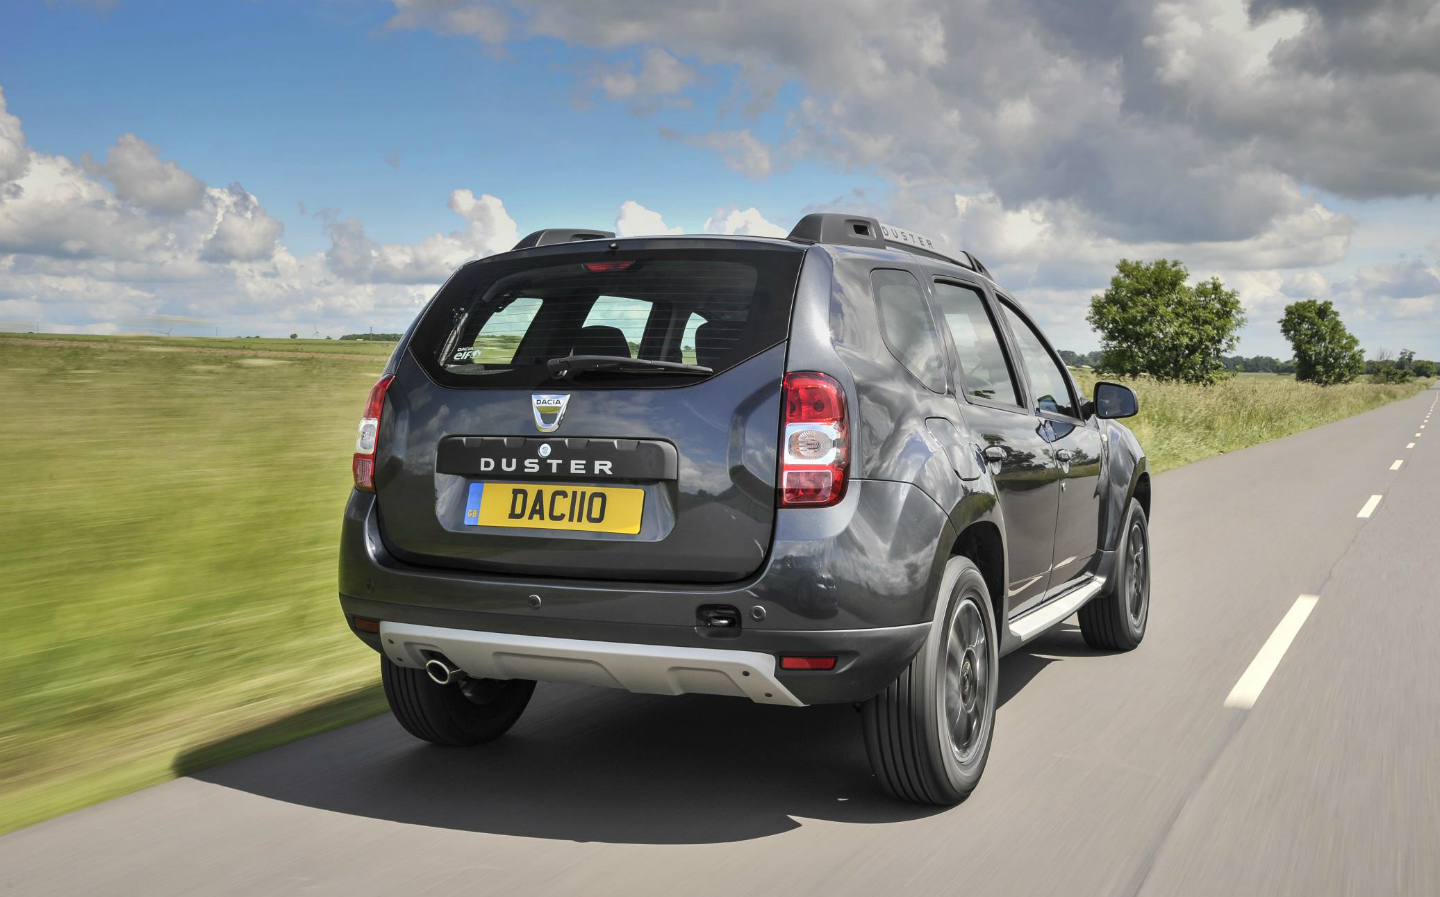 Dacia way to do it: Duster 4x4 is the most affordable new car to buy and run